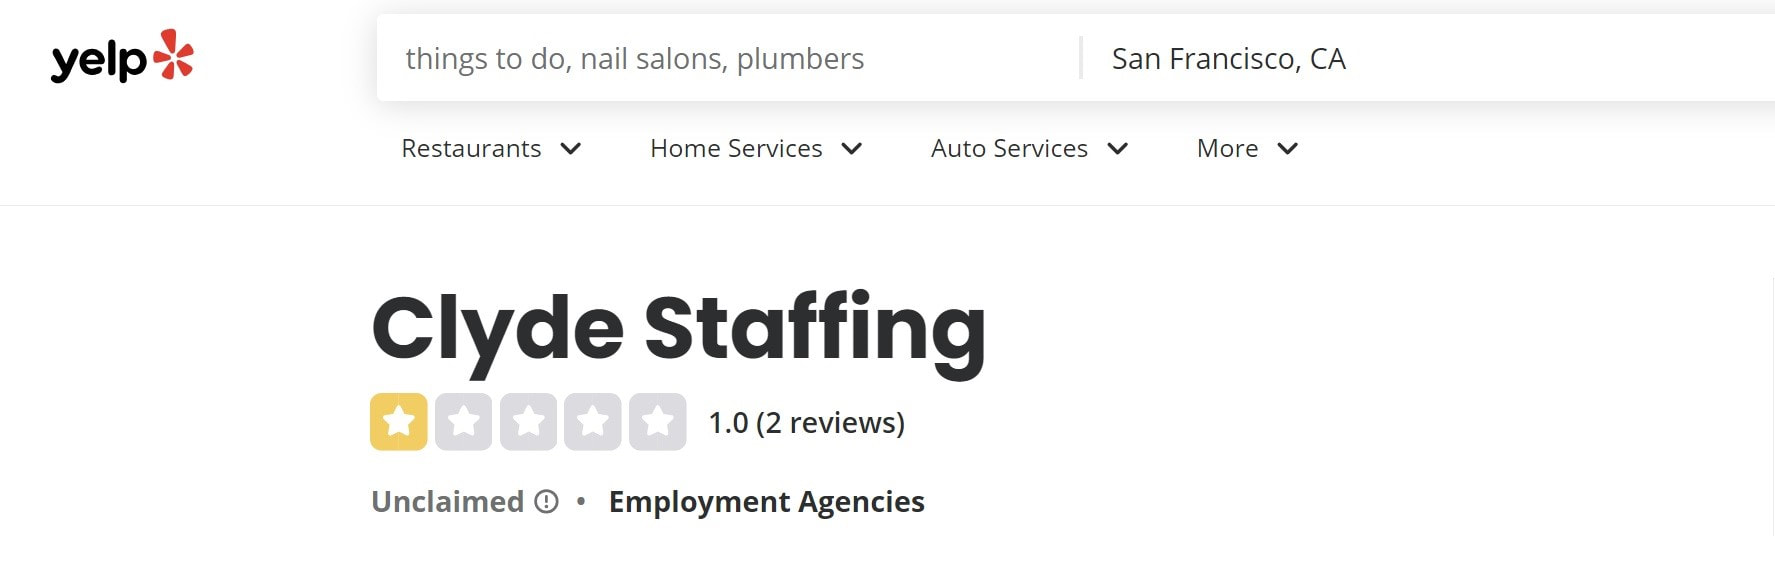 Clyde Staffing profile on Yelp